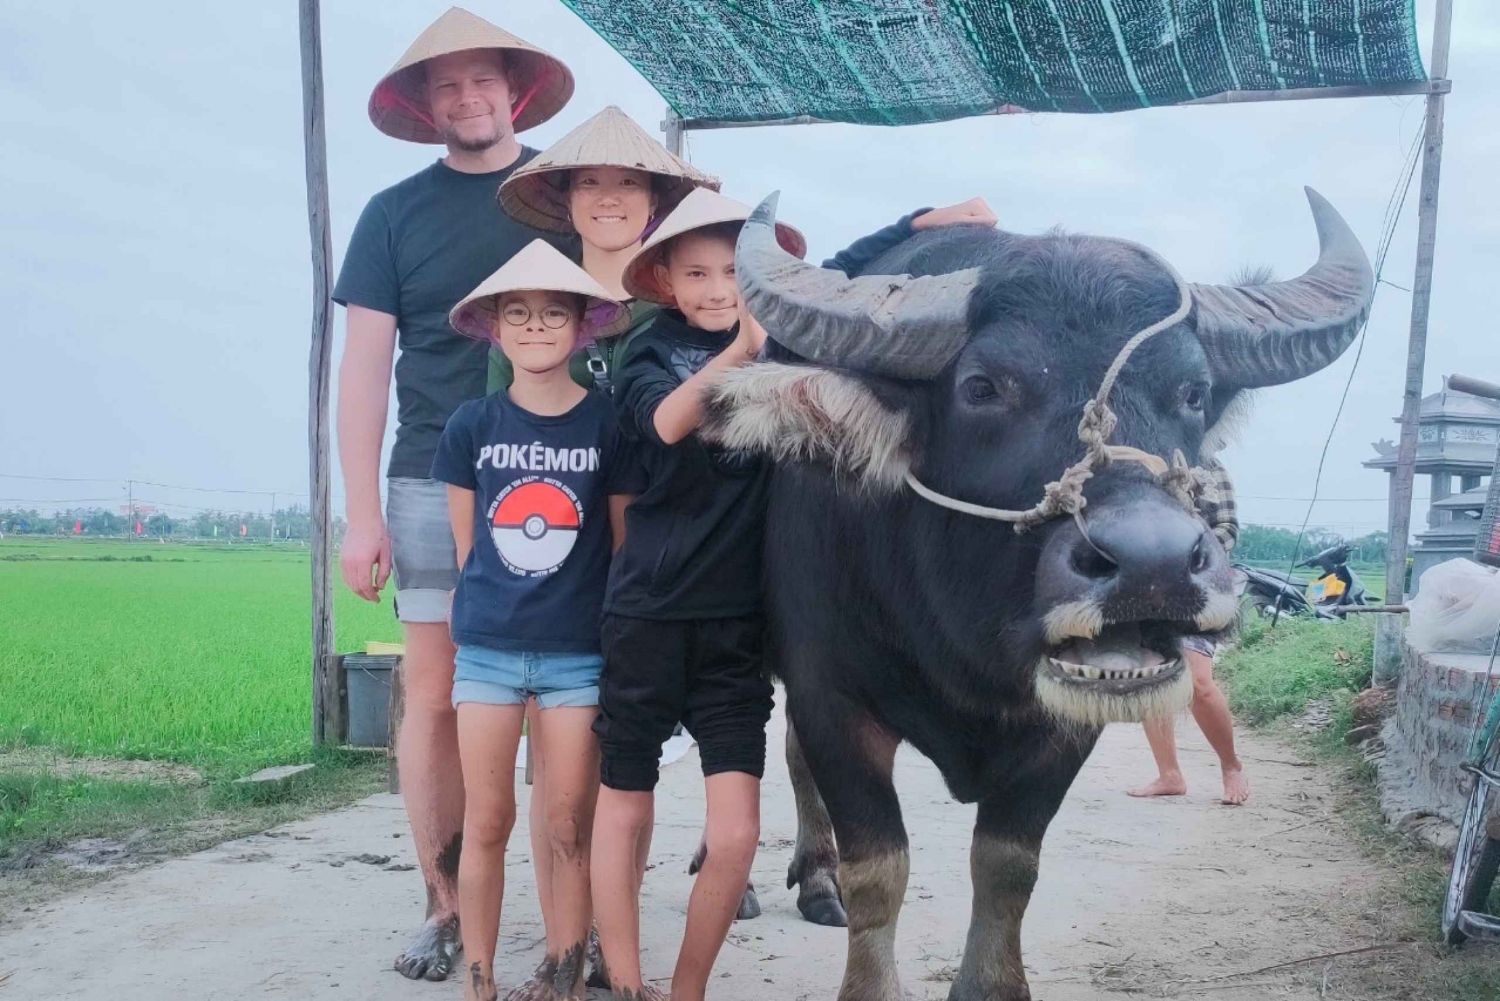 Hoi An: Farming and Buffalo Riding Tour by Bike with Food